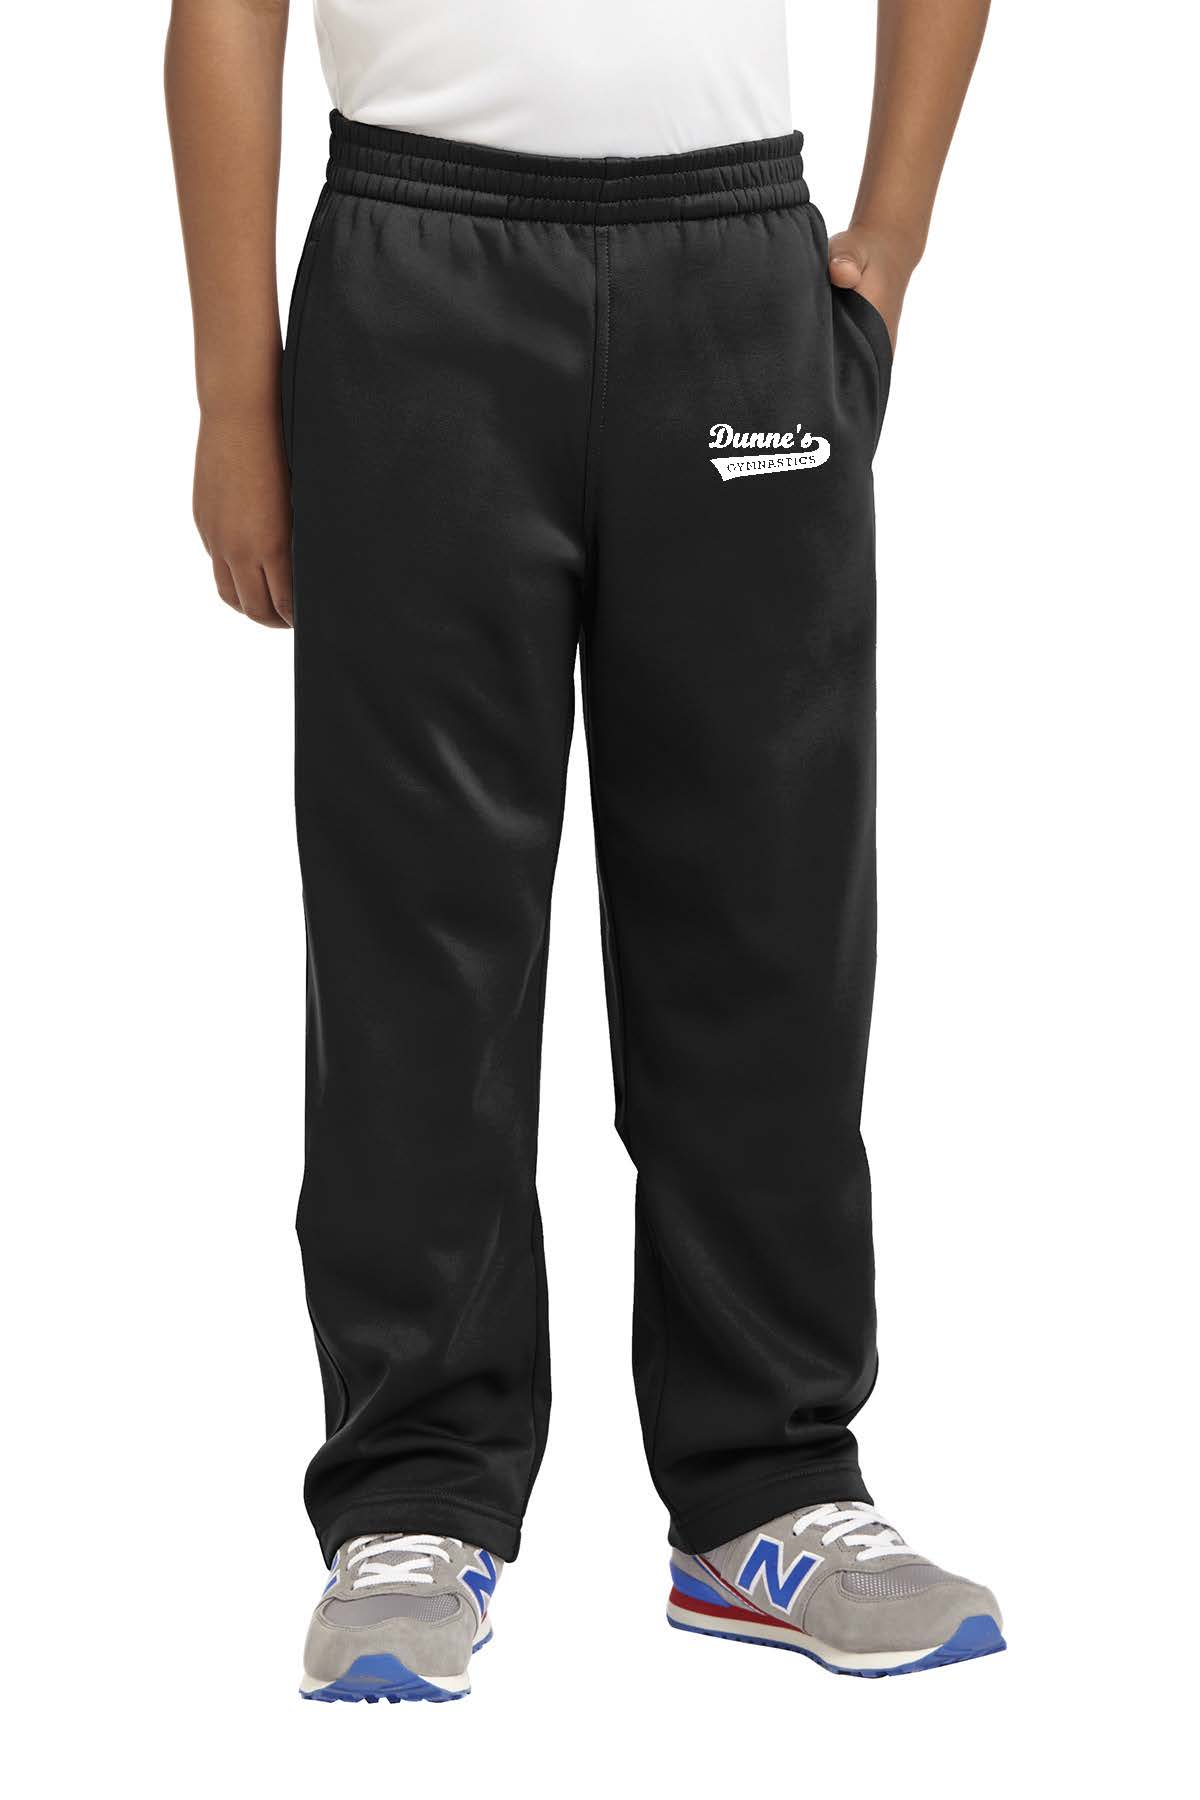 Youth Sport-Wick Fleece Pant with Dunne's Logo